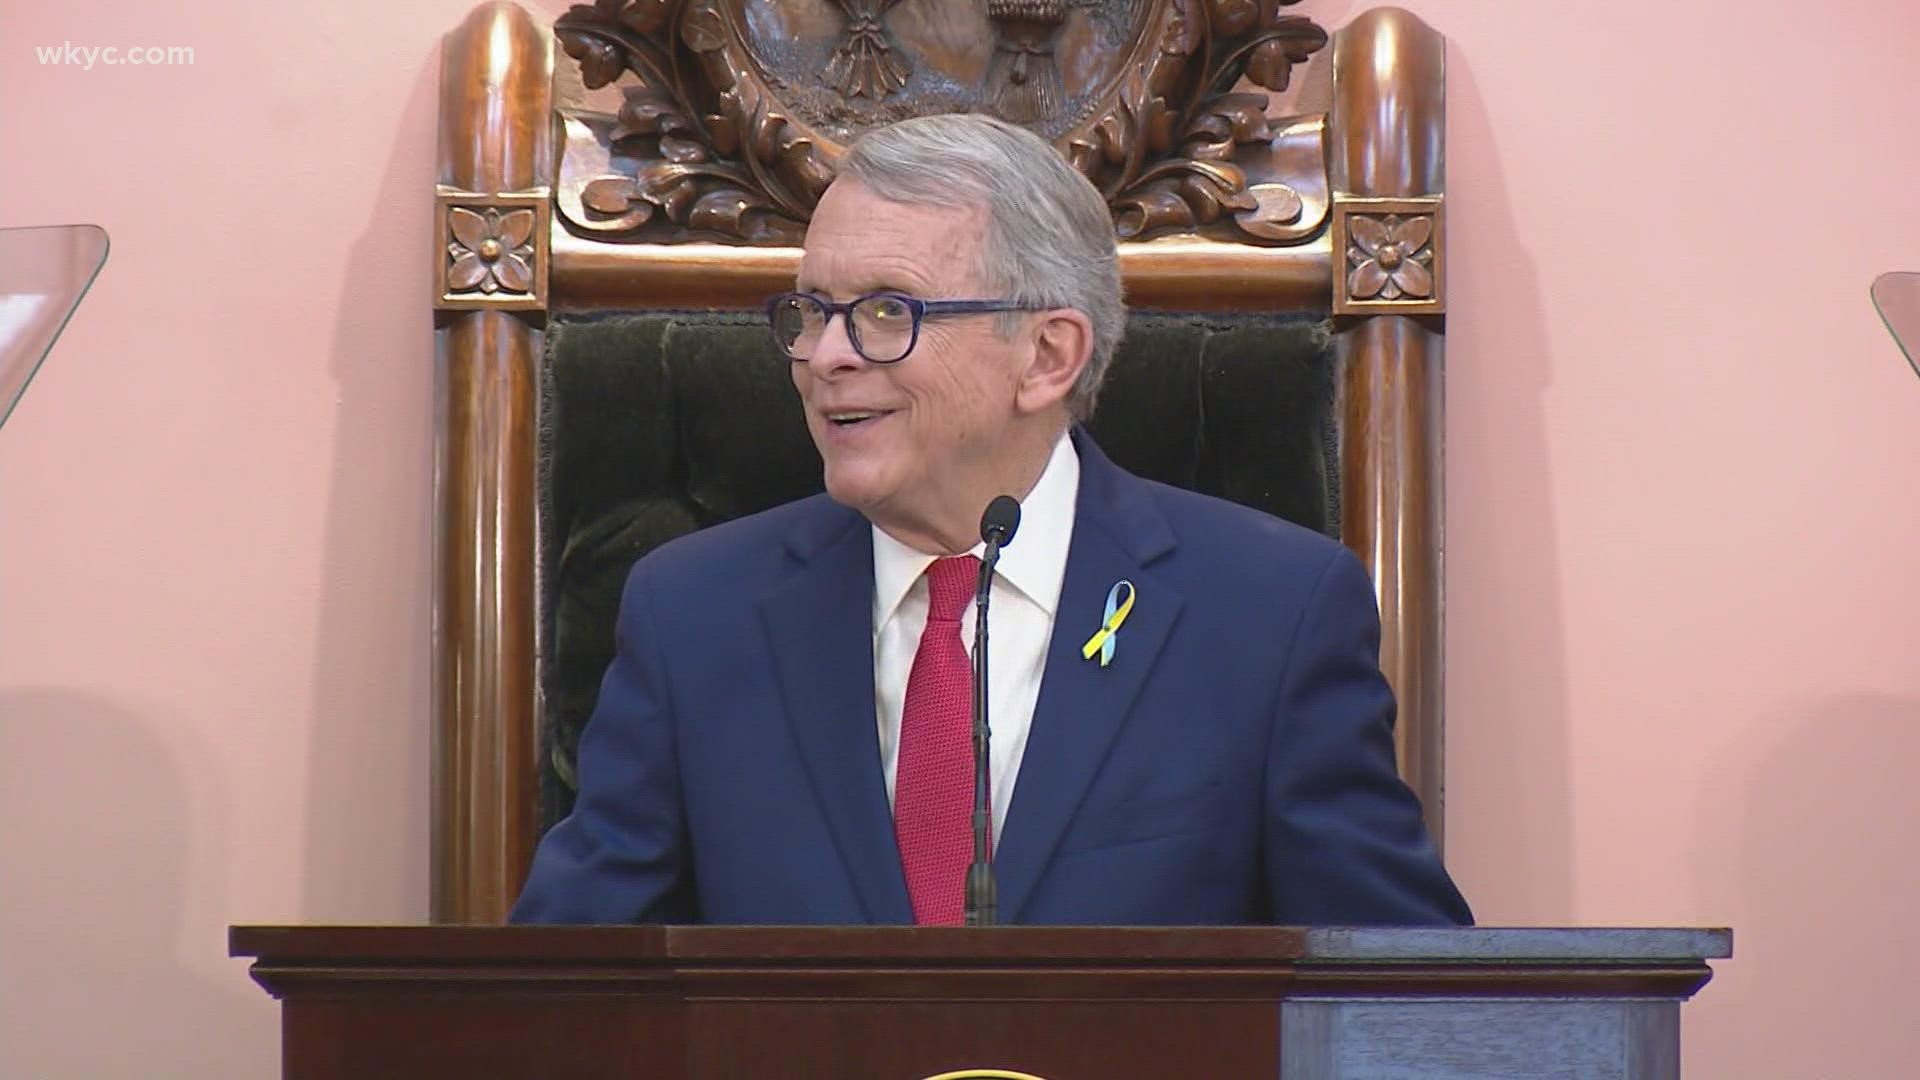 Here's a few minutes from Gov. DeWine's 2022 State of the State address.